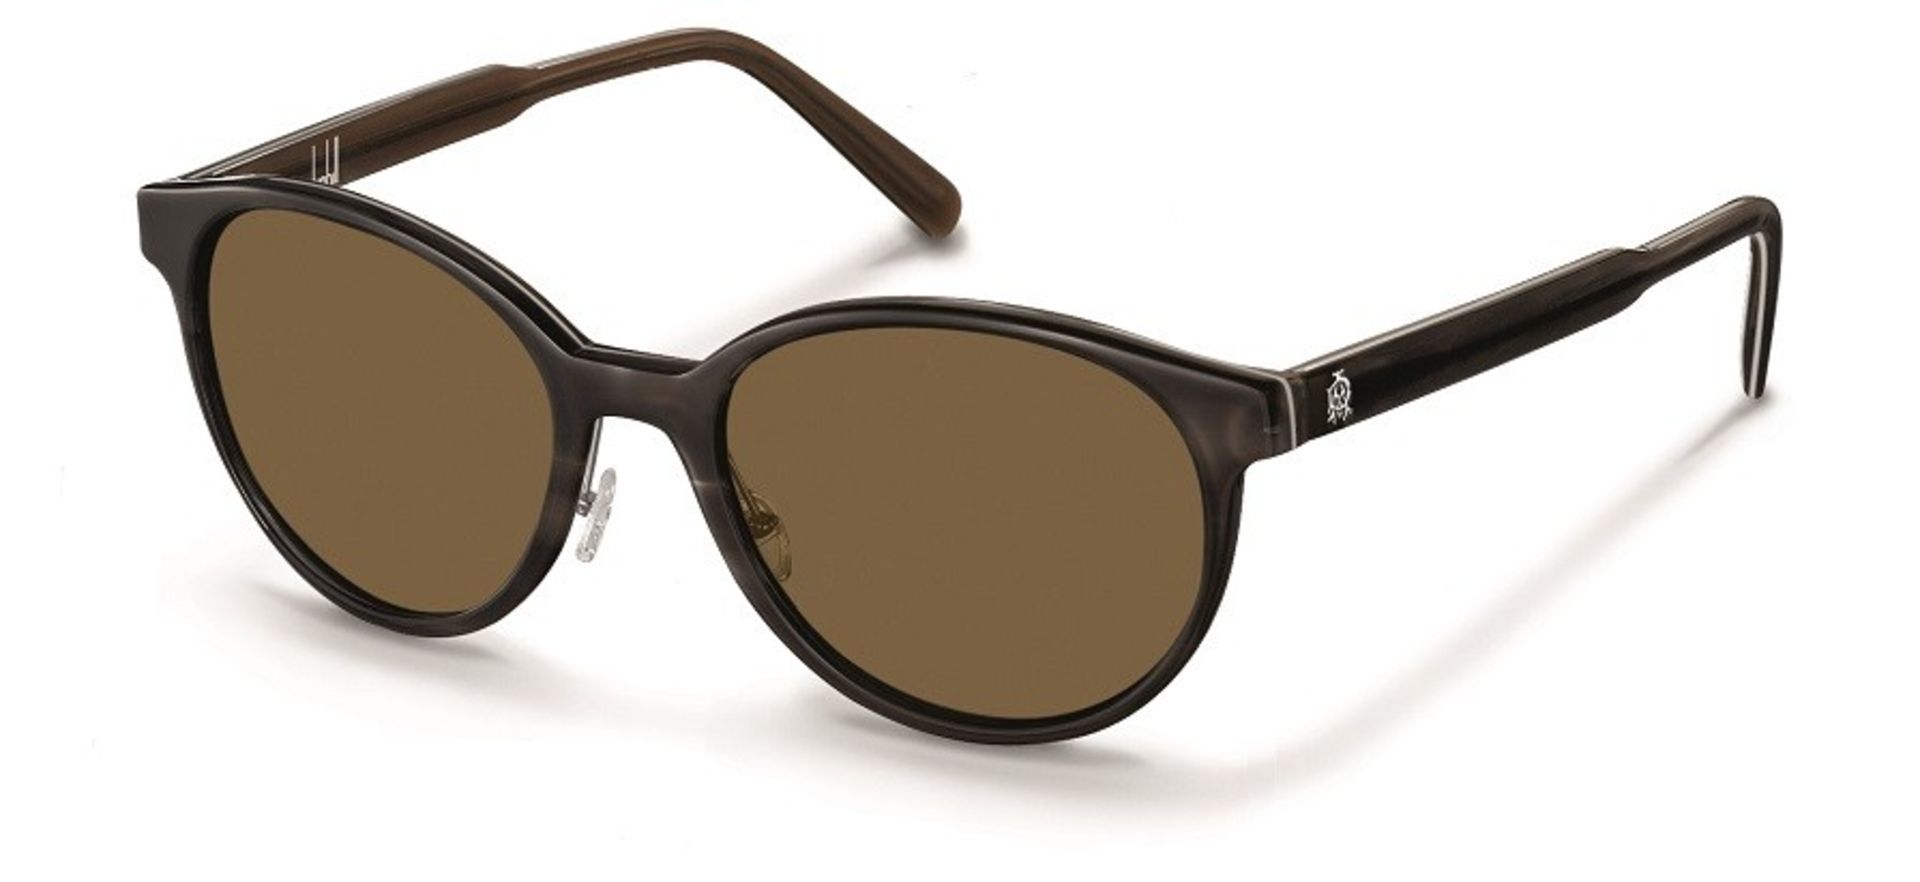 Brand New Pair Of Mens Dunhill Sunglasses - Brown Plastic Frame With Brown Lens RRP: £145.00 D7005-